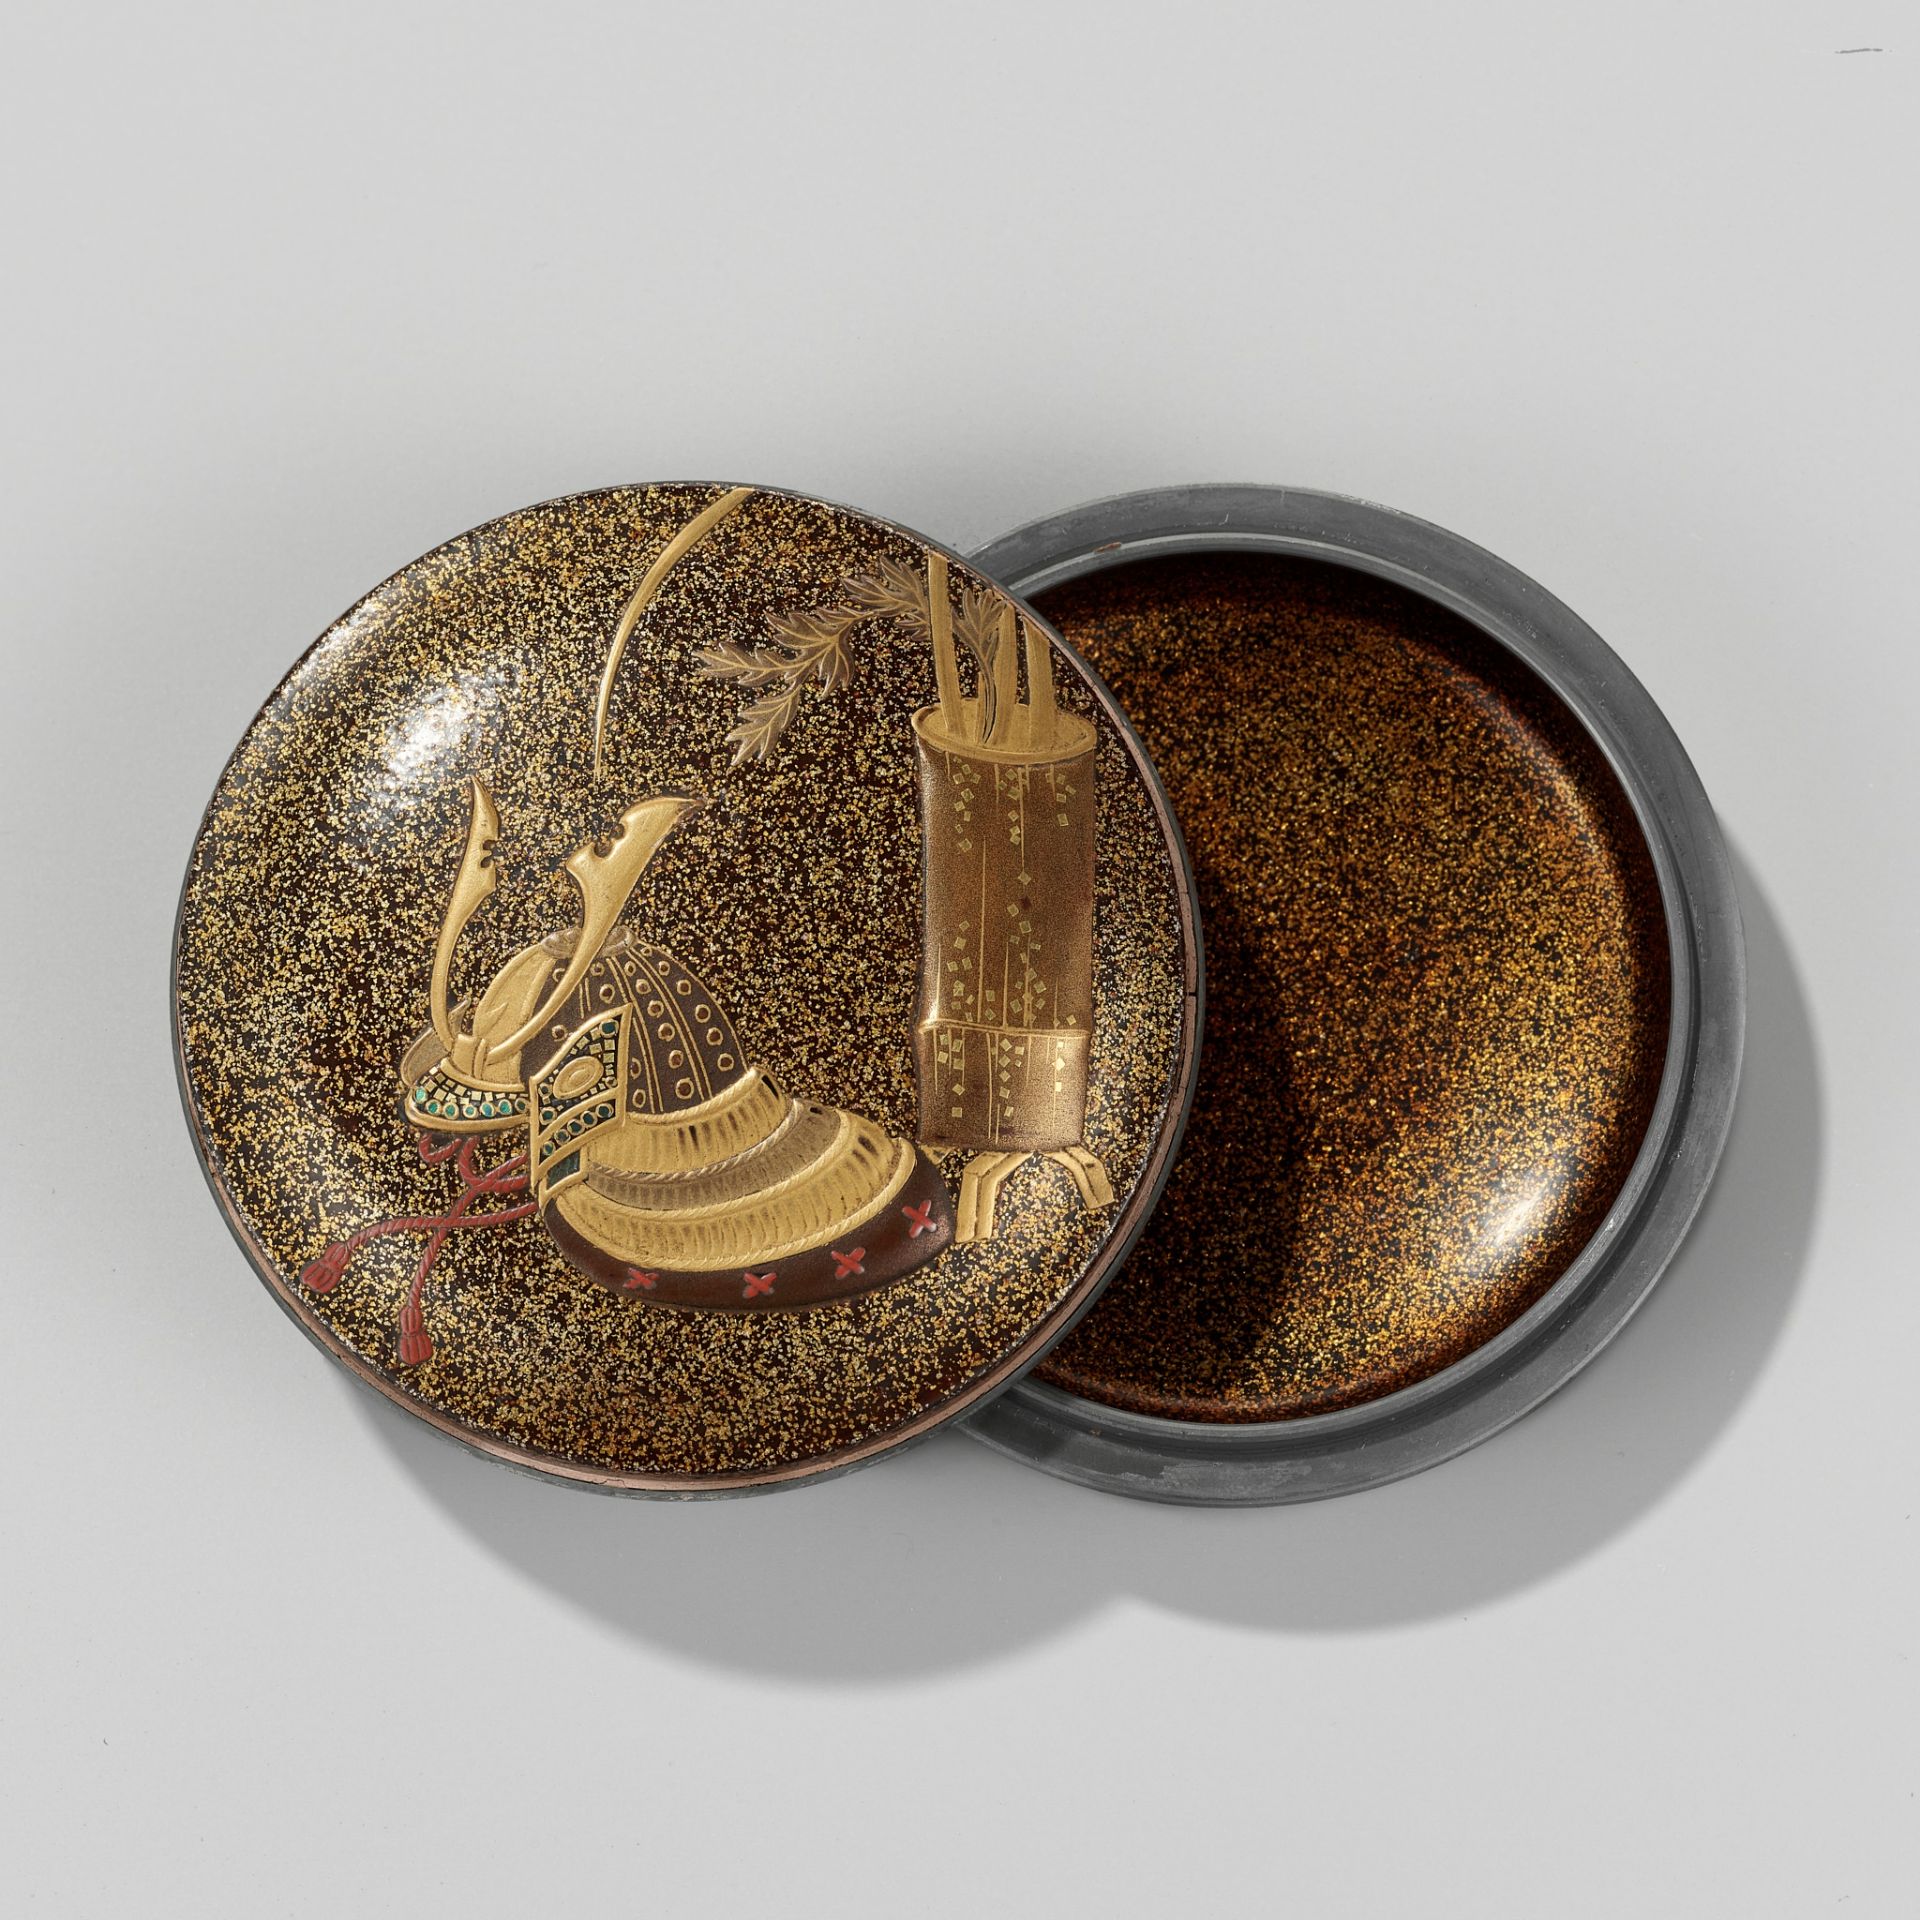 A FINE LACQUER KOGO (INCENSE BOX) AND COVER WITH KABUTO AND BAMBOO HANAKAGO